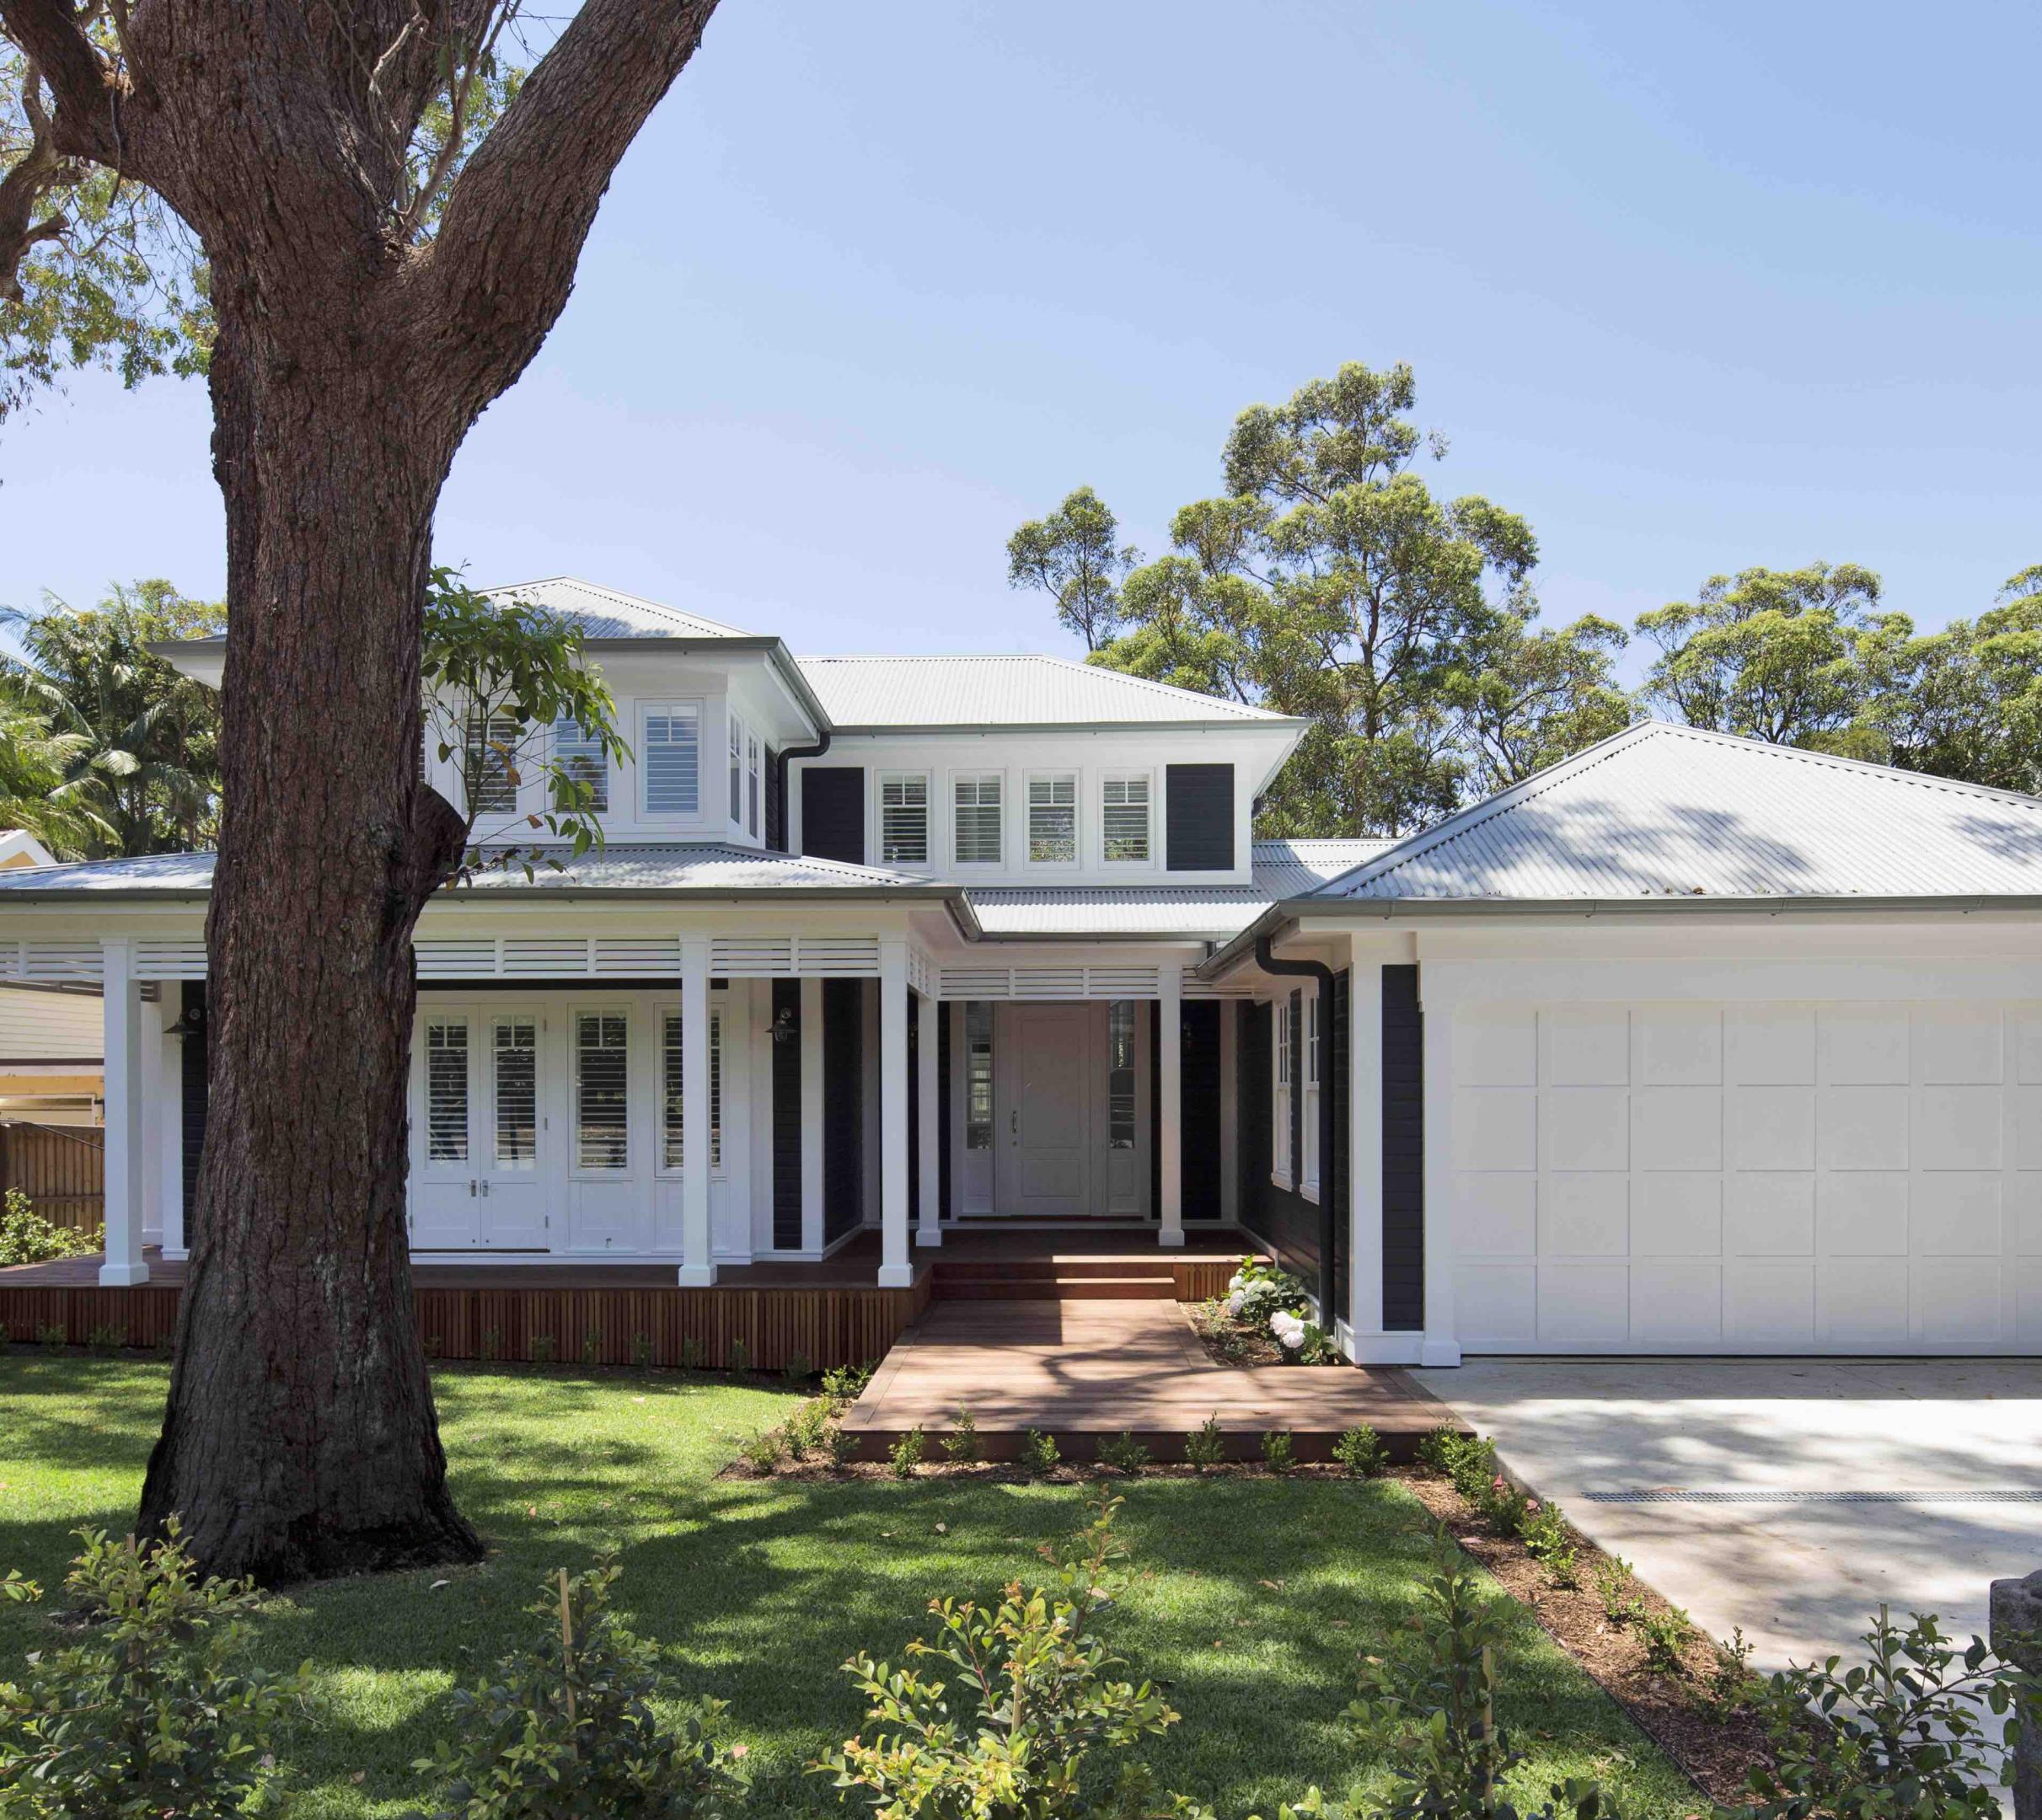 Residential home located in Sydney's Northern Beaches. Roofing features COLORBOND® steel Windspray® in Lysaght CUSTOM ORB® profile. Home was designed and built by Stritt Design & Construct. Photographer is Simon Whitbread.